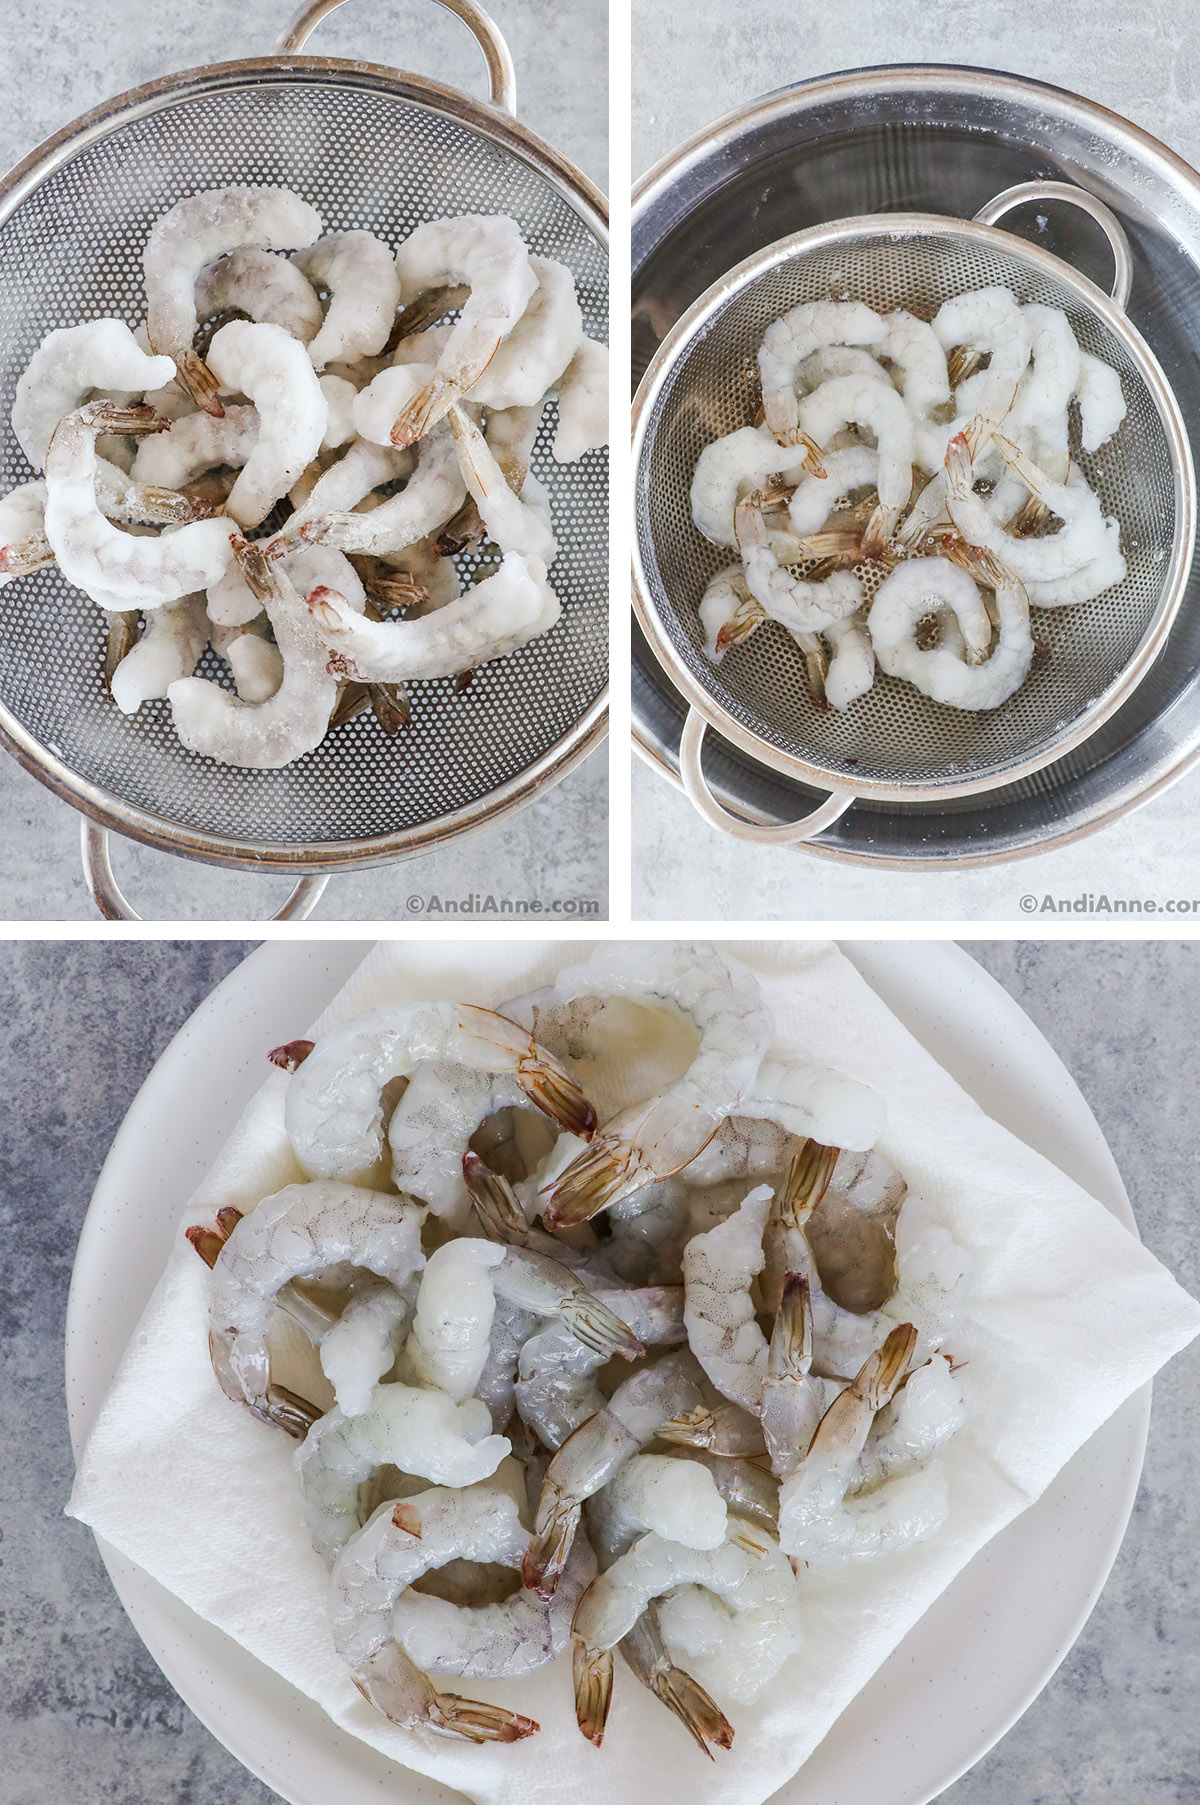 Three images of raw shrimp, first frozen, then soaking in water, then thawed over paper towel.